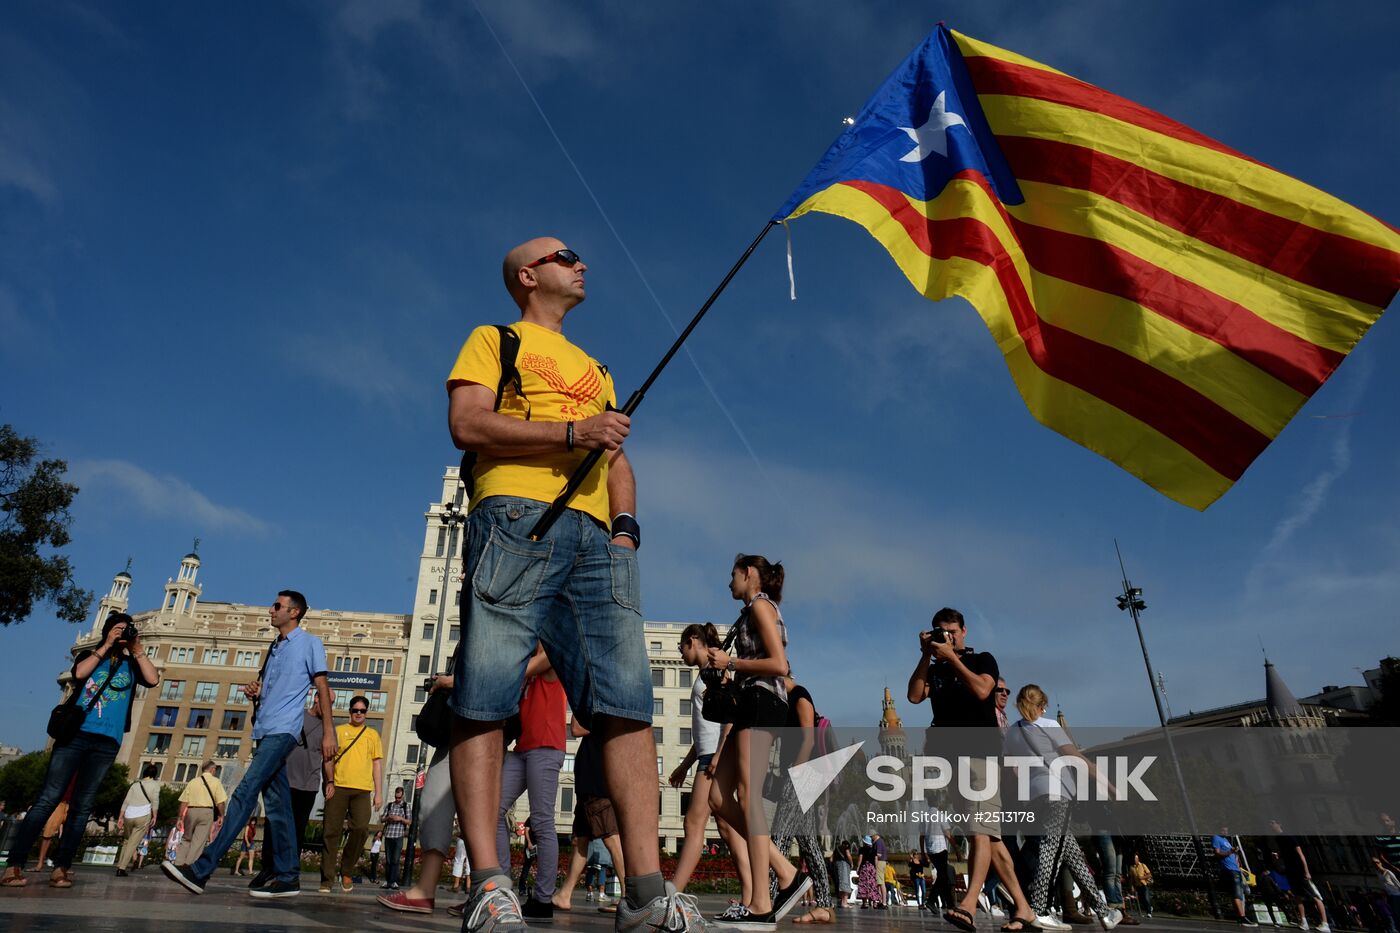 Rally in Barcelona in support of Catalonia's independence